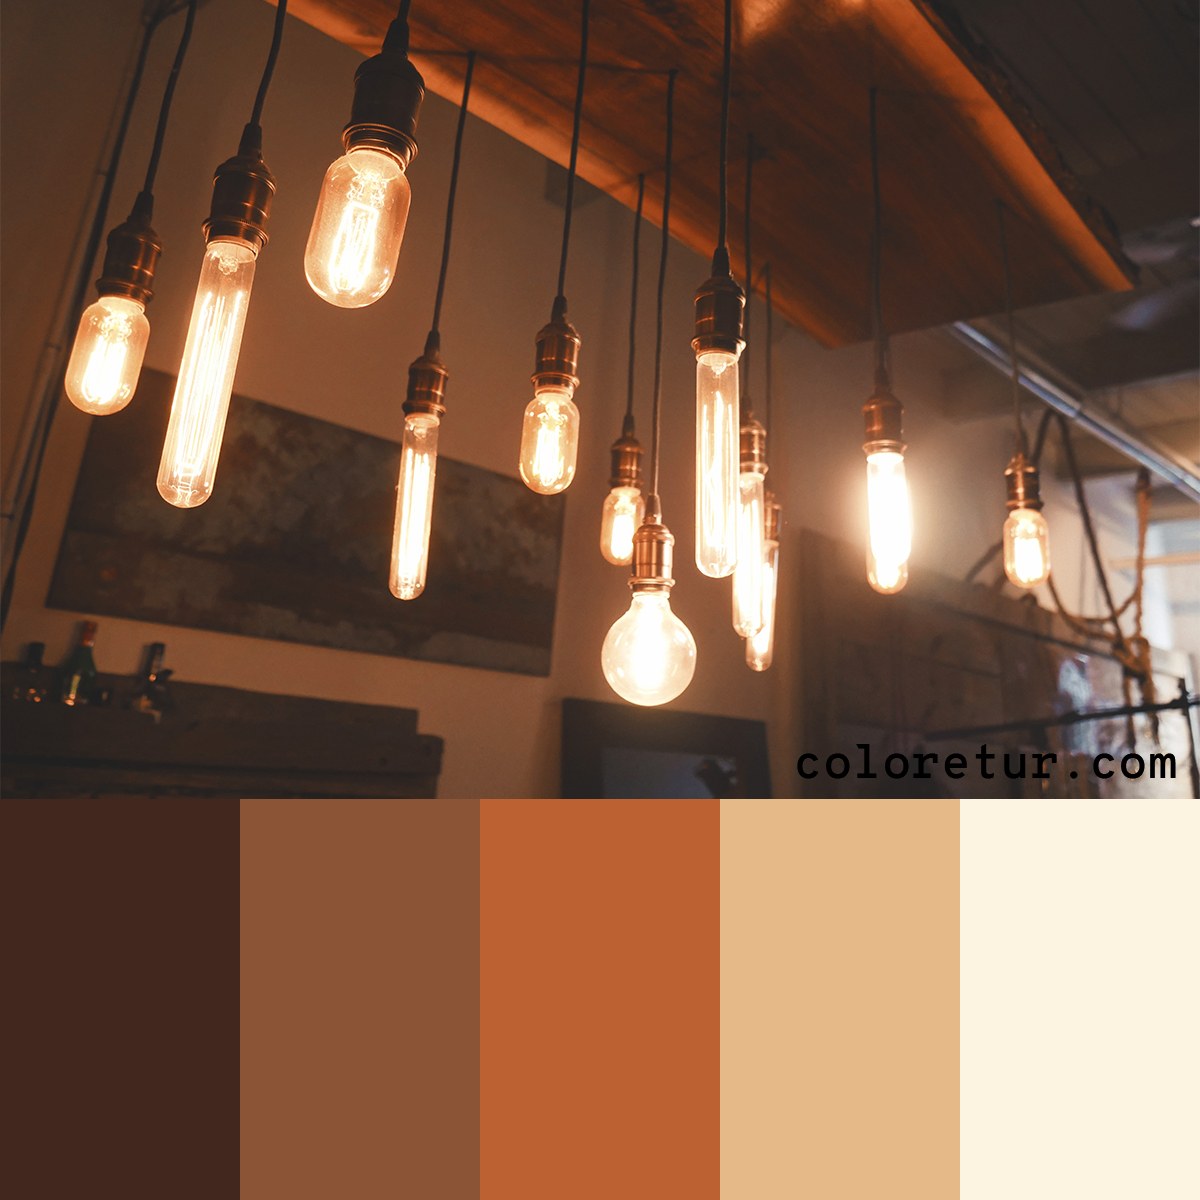 A warm yellow-orange color palette, chosen from the hot incandescence of vintage lightbulbs.